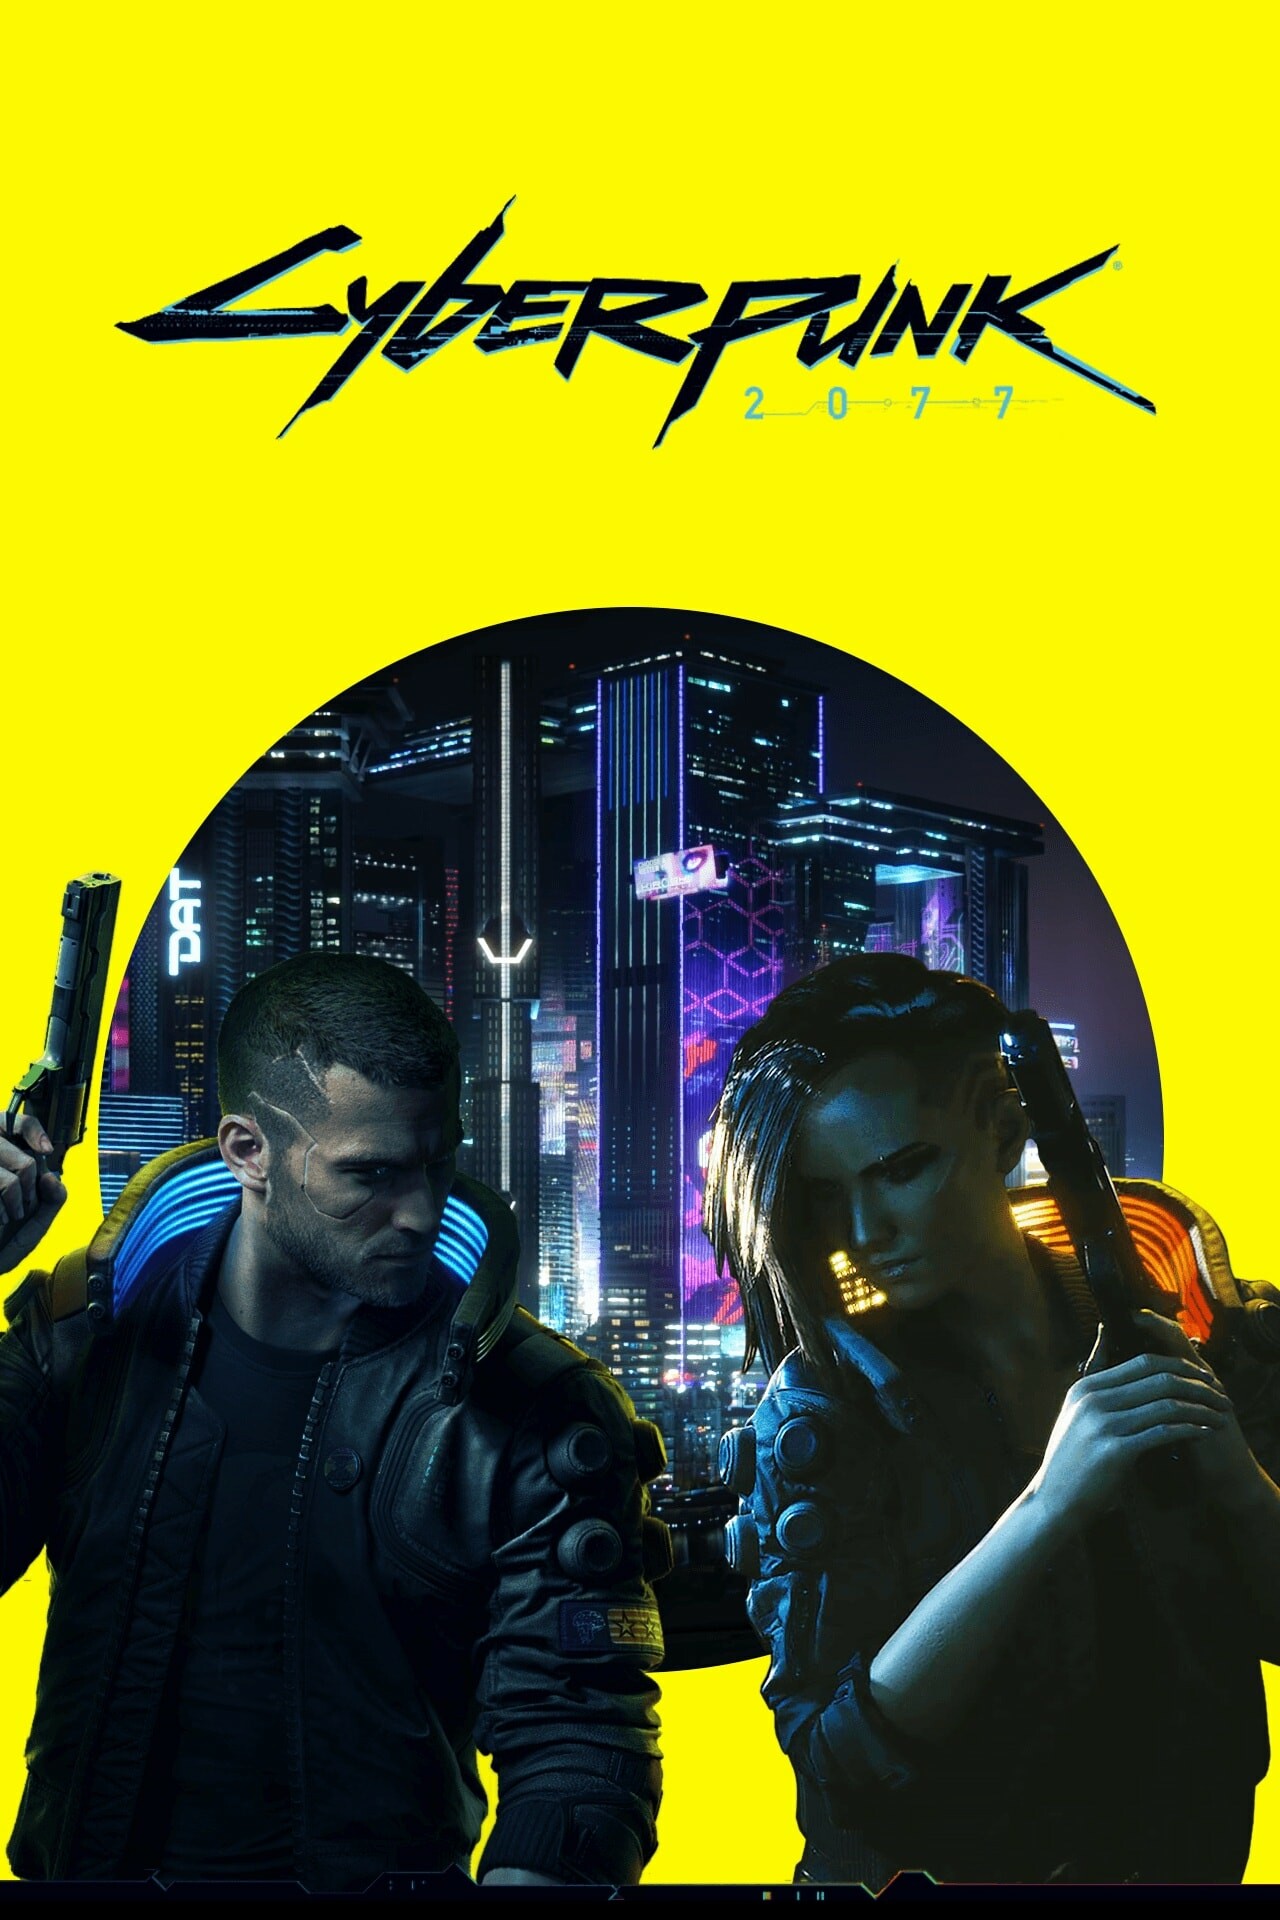 Cyberpunk 2077: While the mission structure and open-world elements follow a similar formula to other games, the world within the game is its stellar achievement, Published by CD Projekt. 1280x1920 HD Wallpaper.